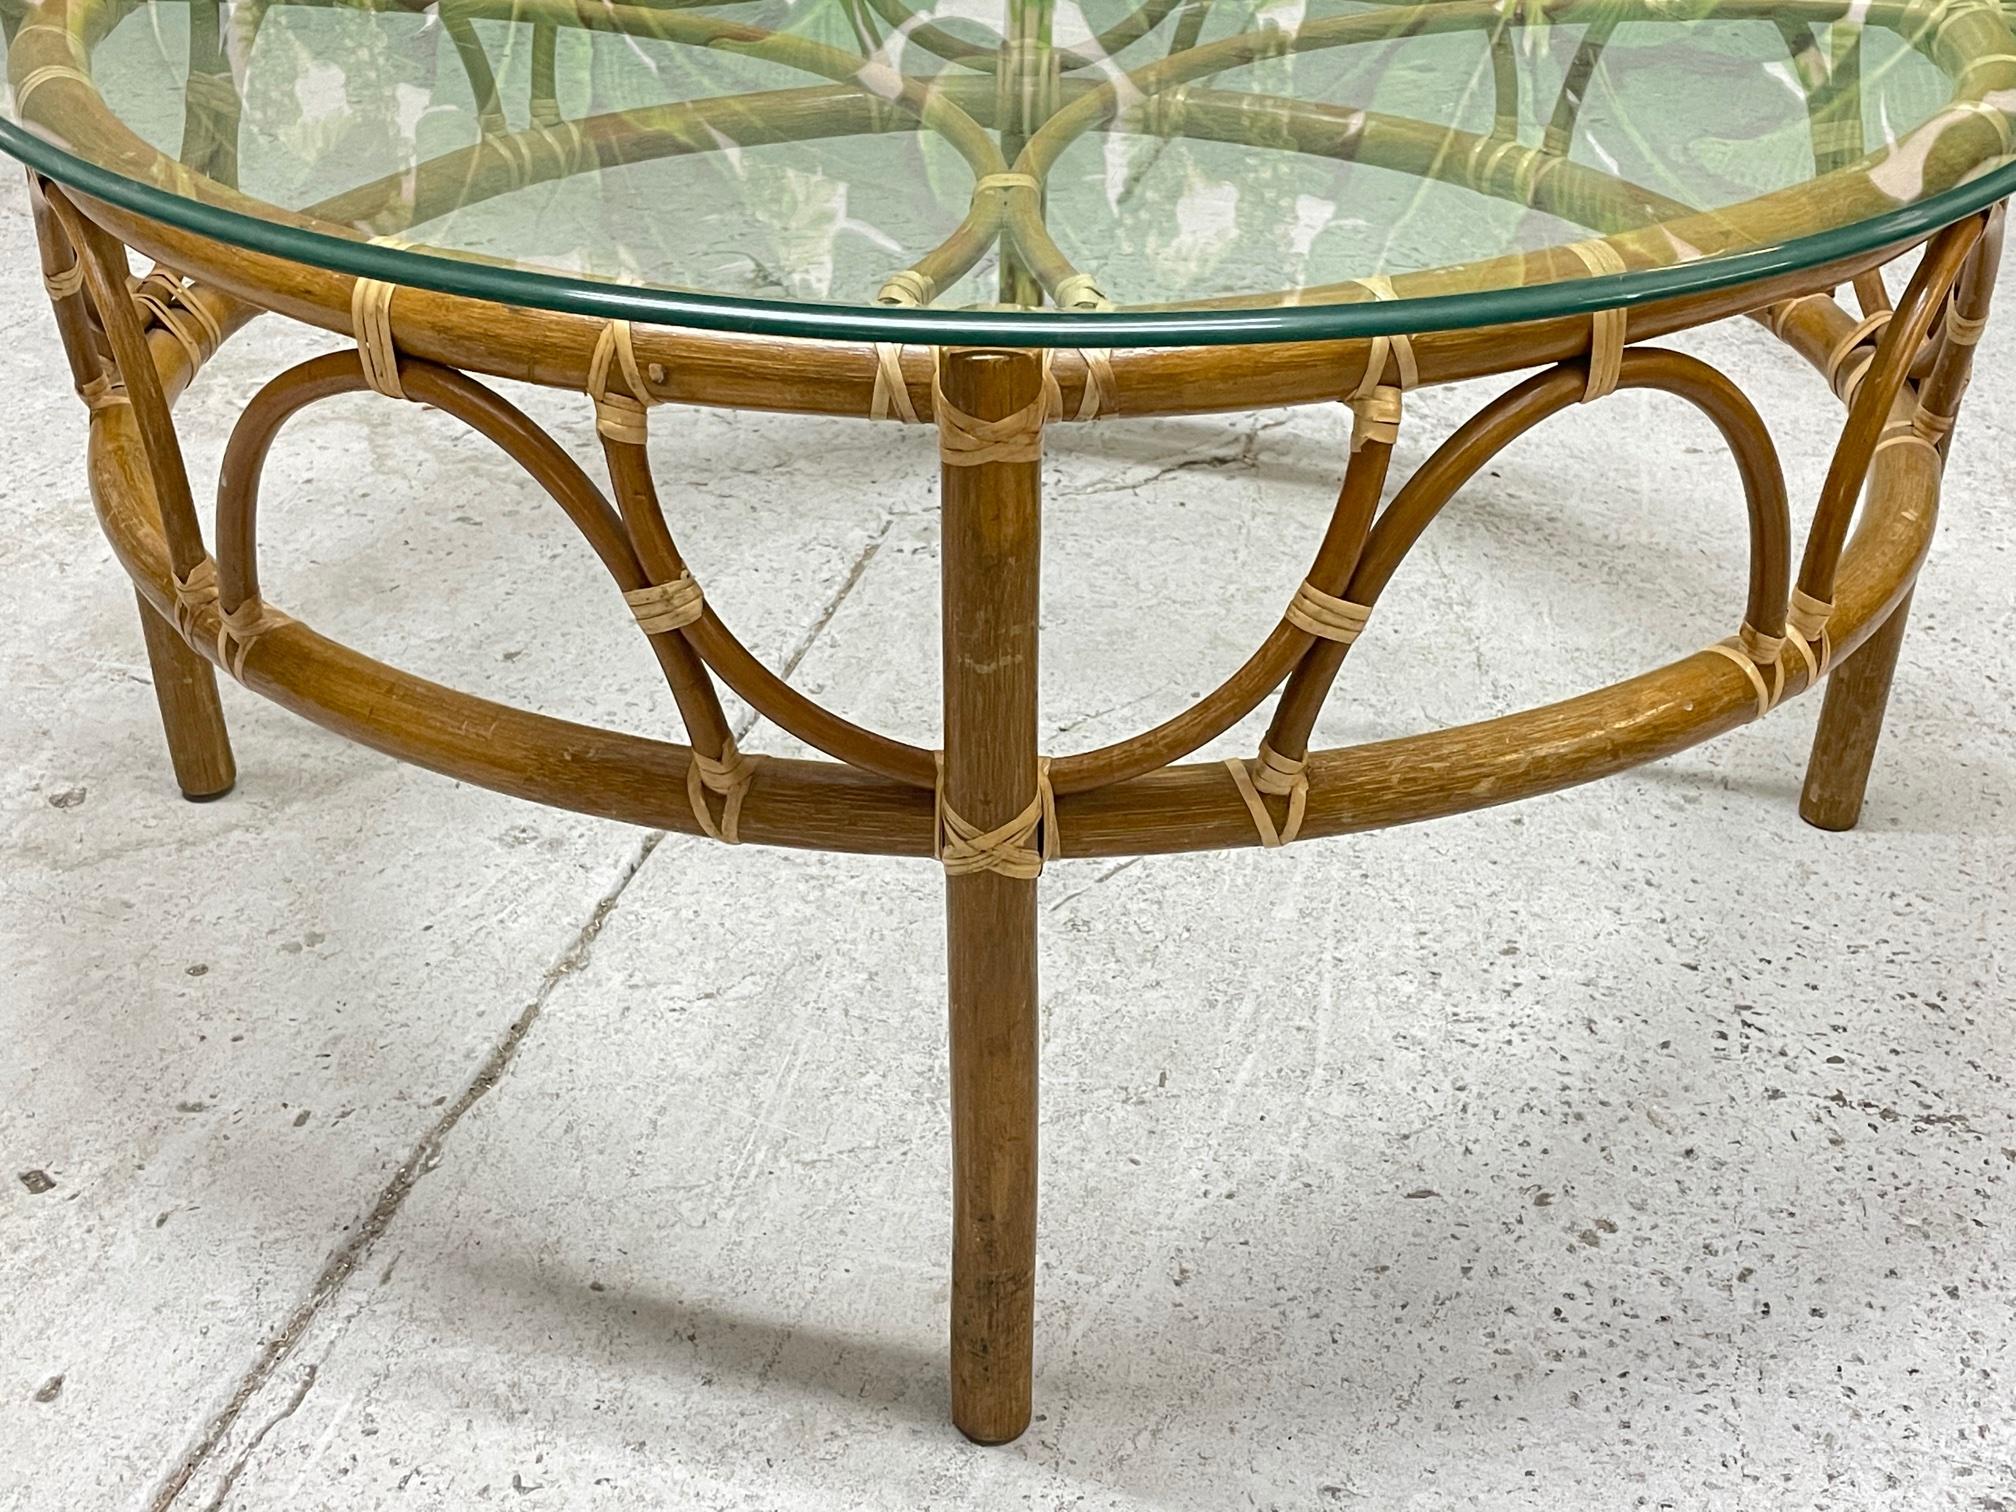 Vintage rattan coffee table in boho style with a glass round top. Good condition with minor imperfections consistent with age.